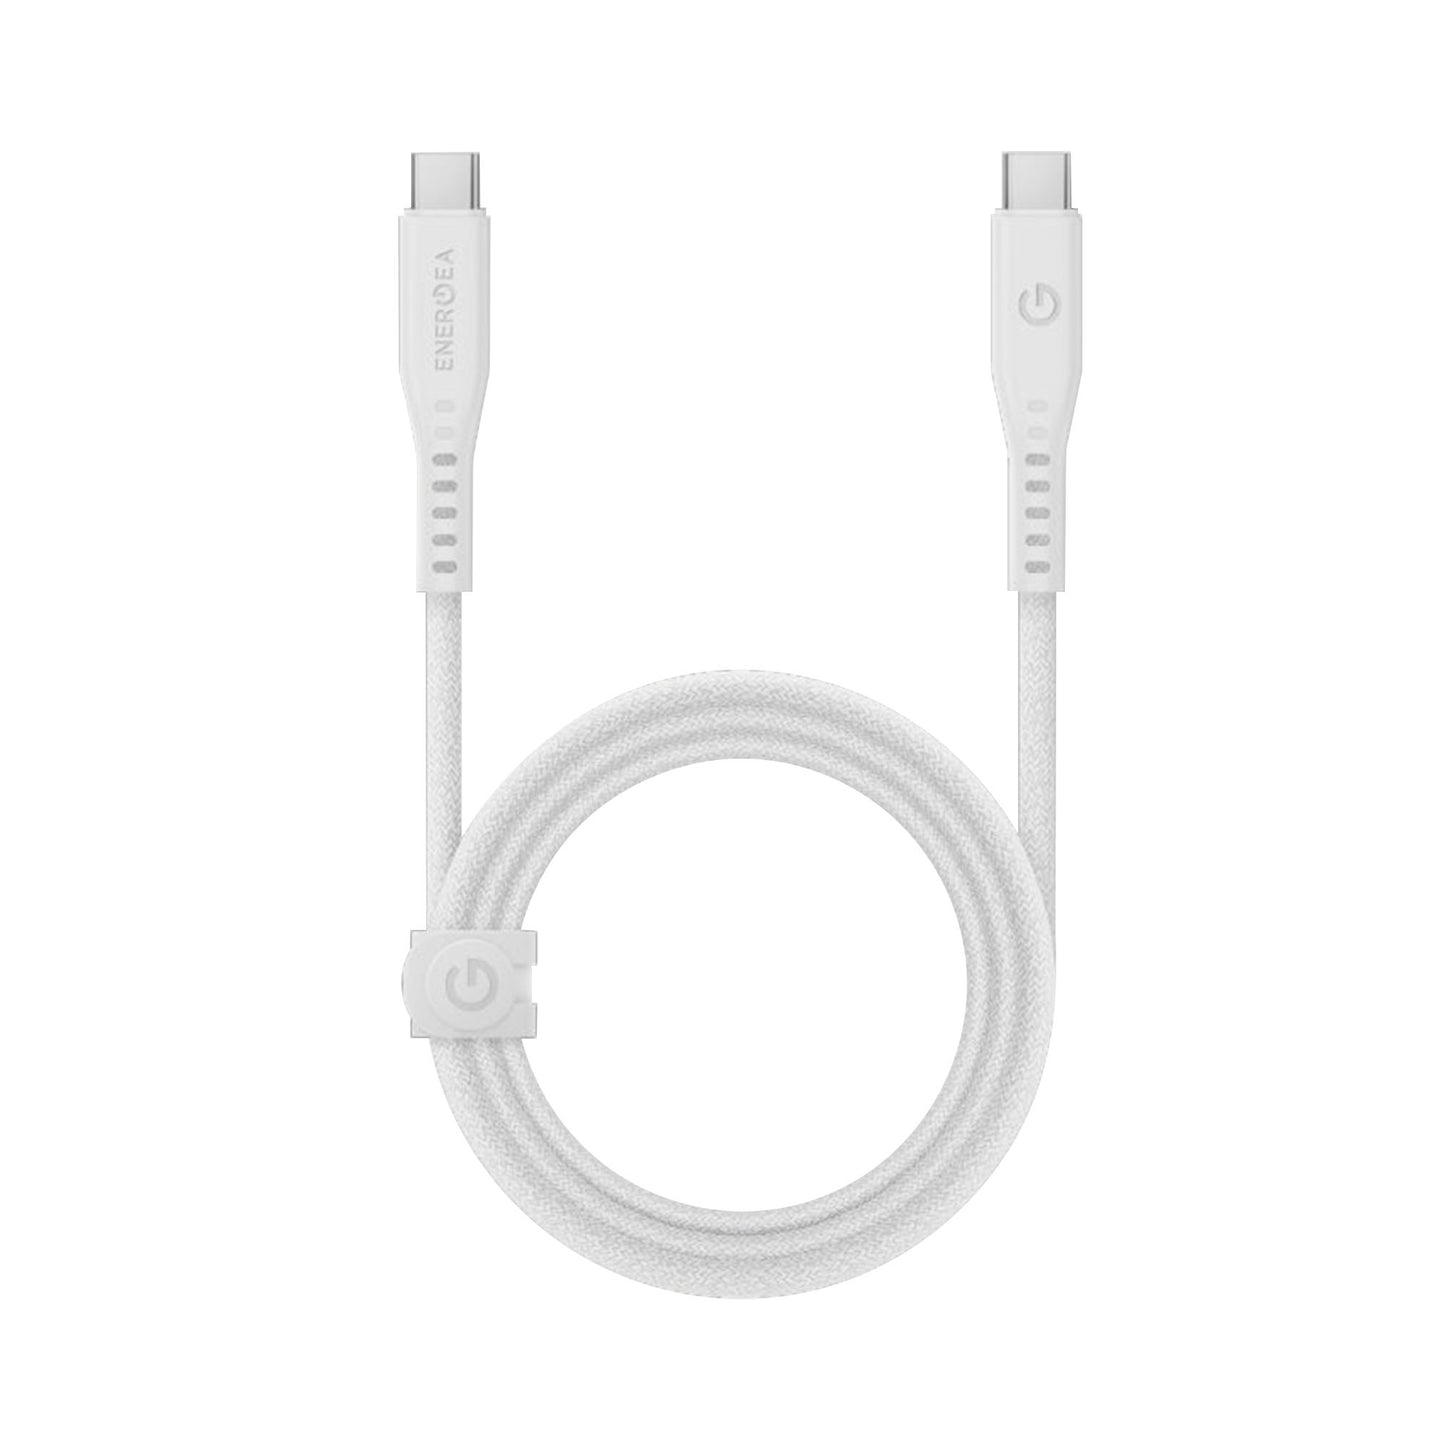 ENERGEA Flow 240w USB-C to USB-C PD Fast Charging Cable 1.5m - White